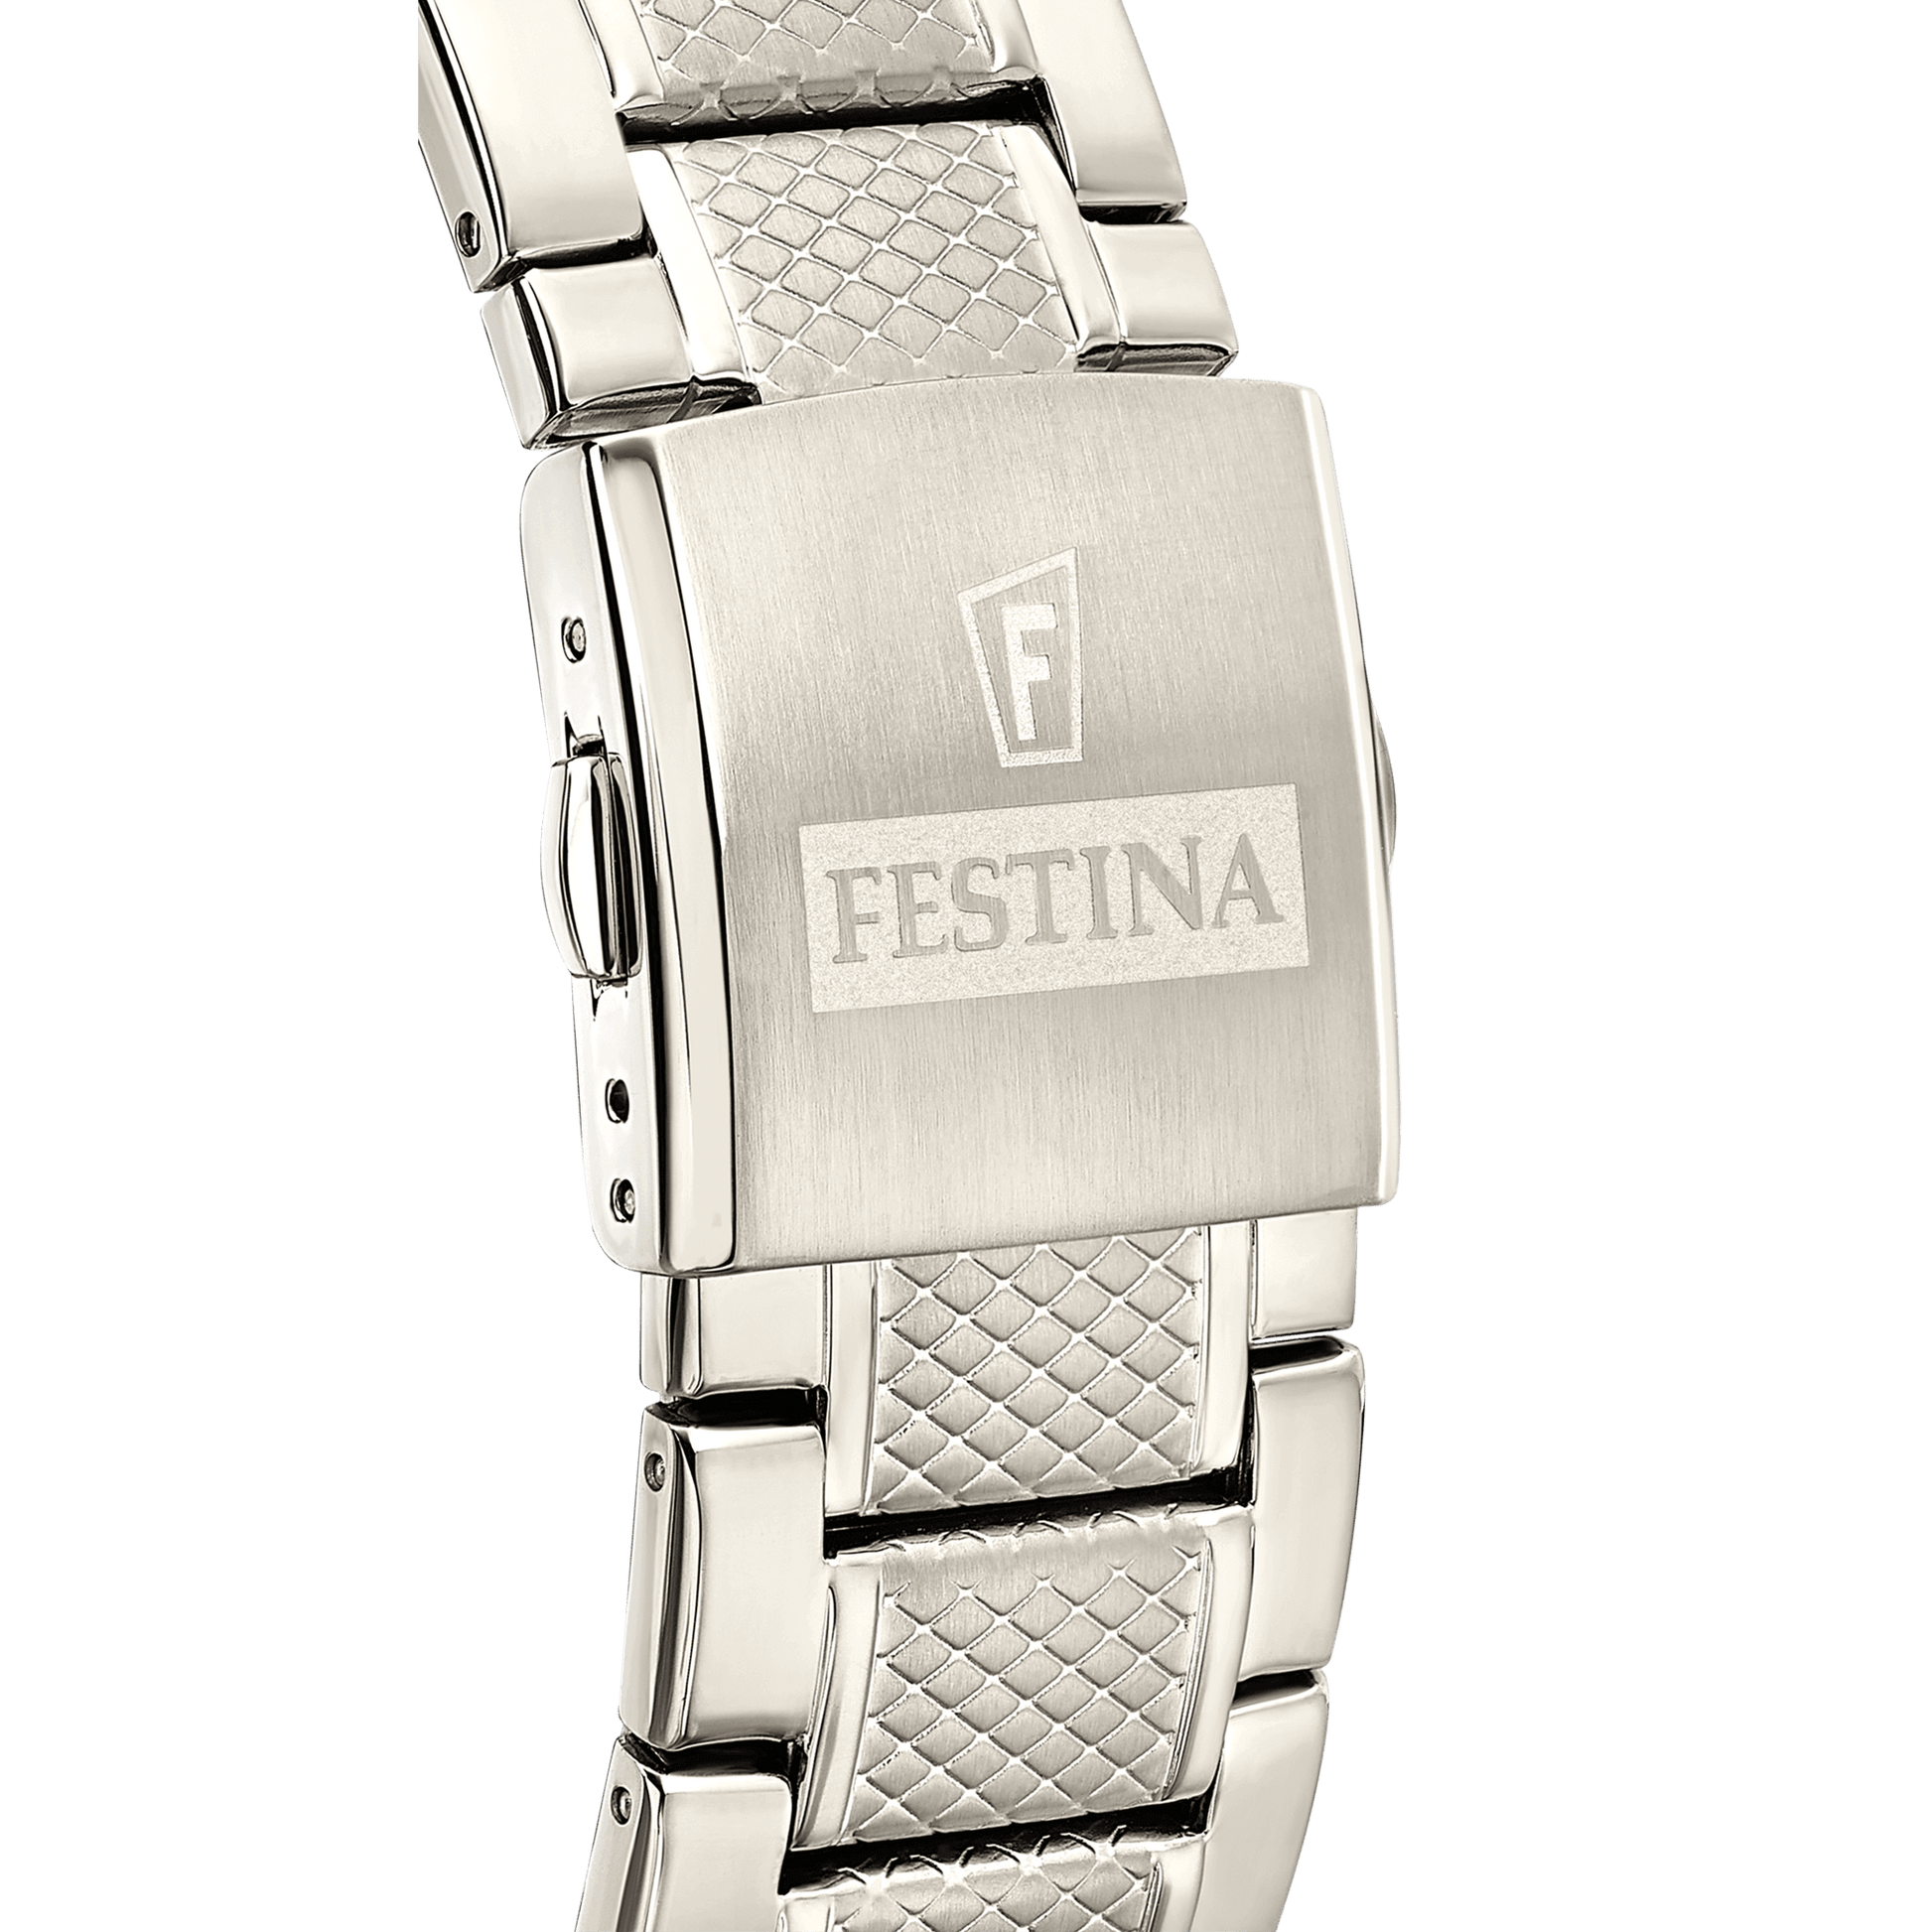 Chrono Sport F20439-2 | Water Resistance 100m/330ft - Strap Material Stainless Steel - Size 44 mm / Free shipping, 2 years warranty & 30 Days Return | Festina Watches USA